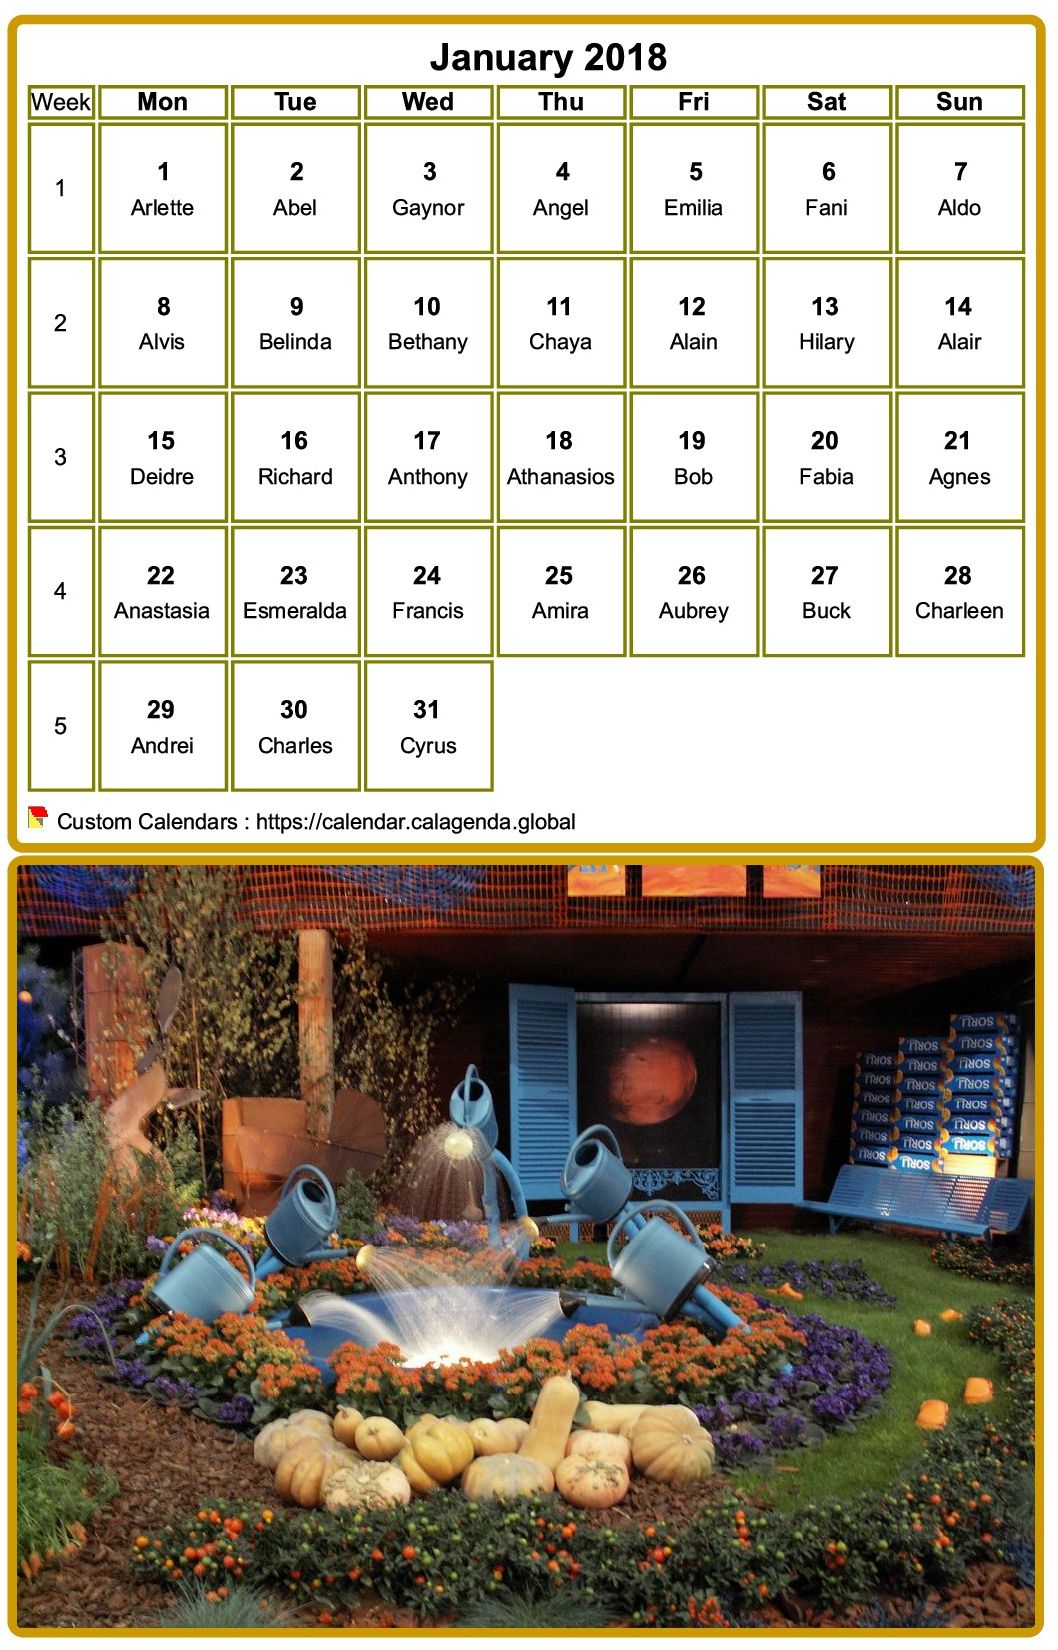 Calendar monthly 2018 to print, with photograph in underside